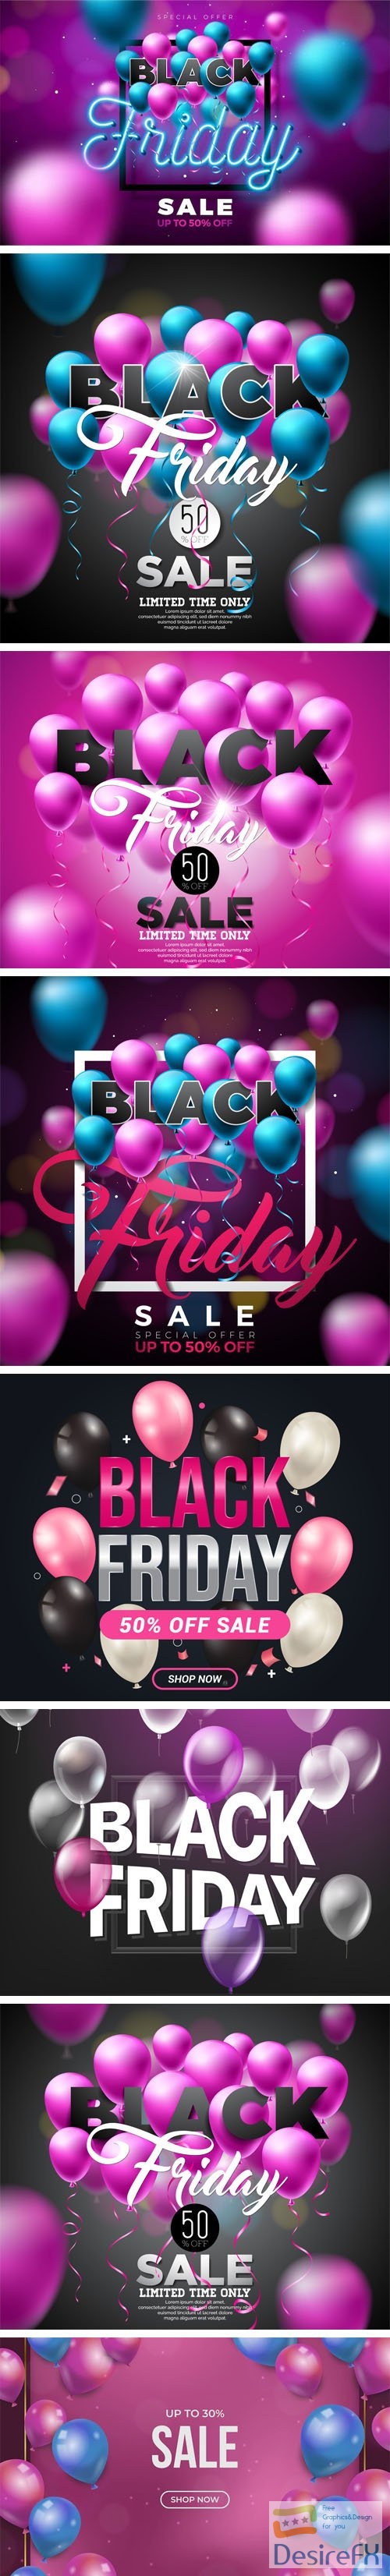 Black Friday Sales Backgrounds with Balloons - Vector Templates